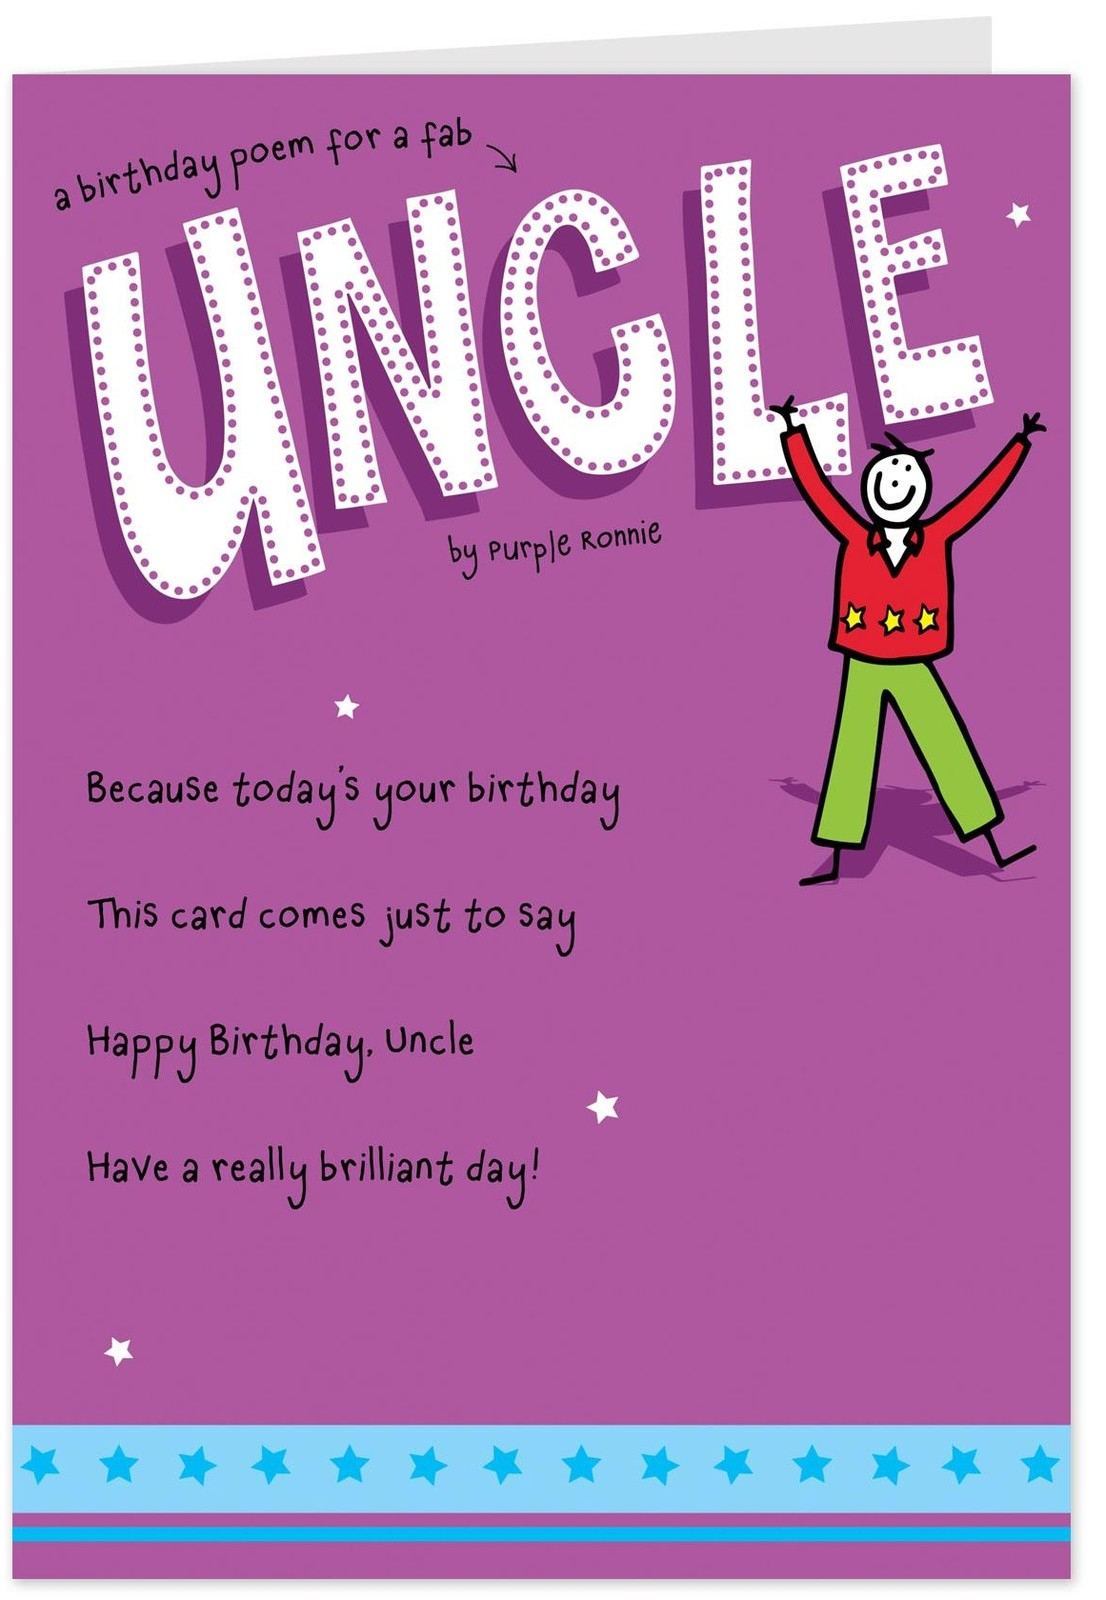 Birthday Card Ideas For Uncle Happy Birthday Images For Uncle Free Bday Cards And Pictures